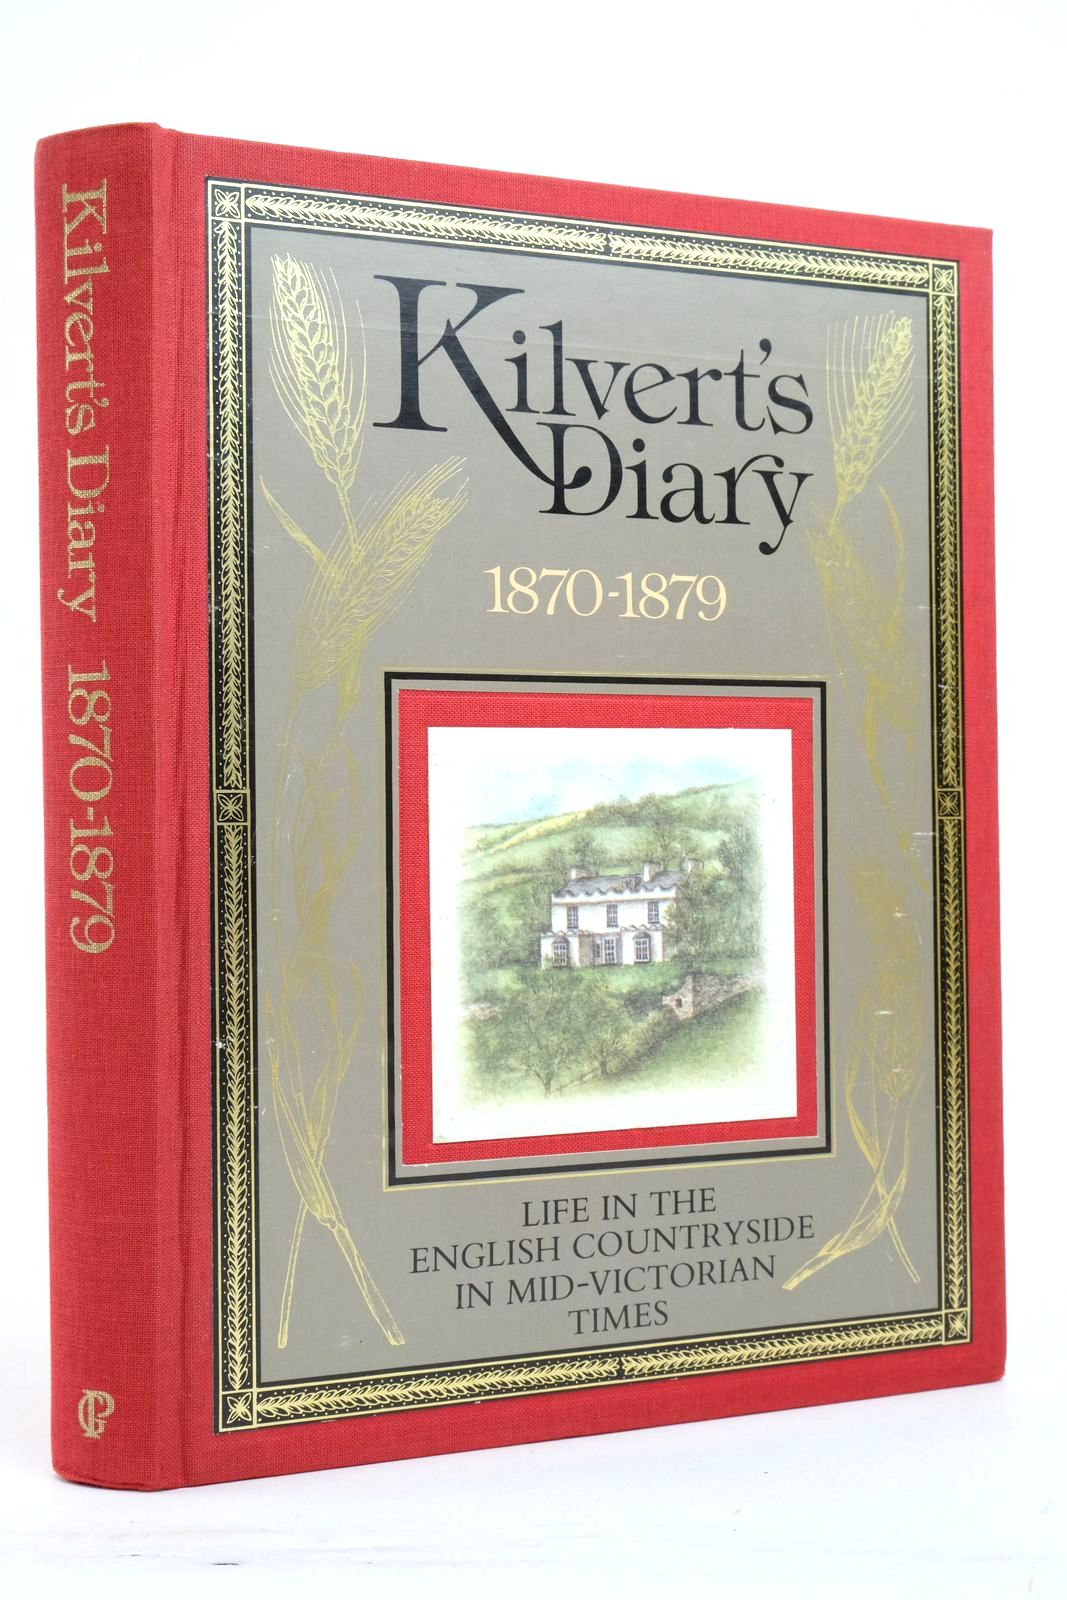 Photo of KILVERT'S DIARY 1870-1879 written by Kilvert, Francis published by Guild Publishing (STOCK CODE: 2136792)  for sale by Stella & Rose's Books